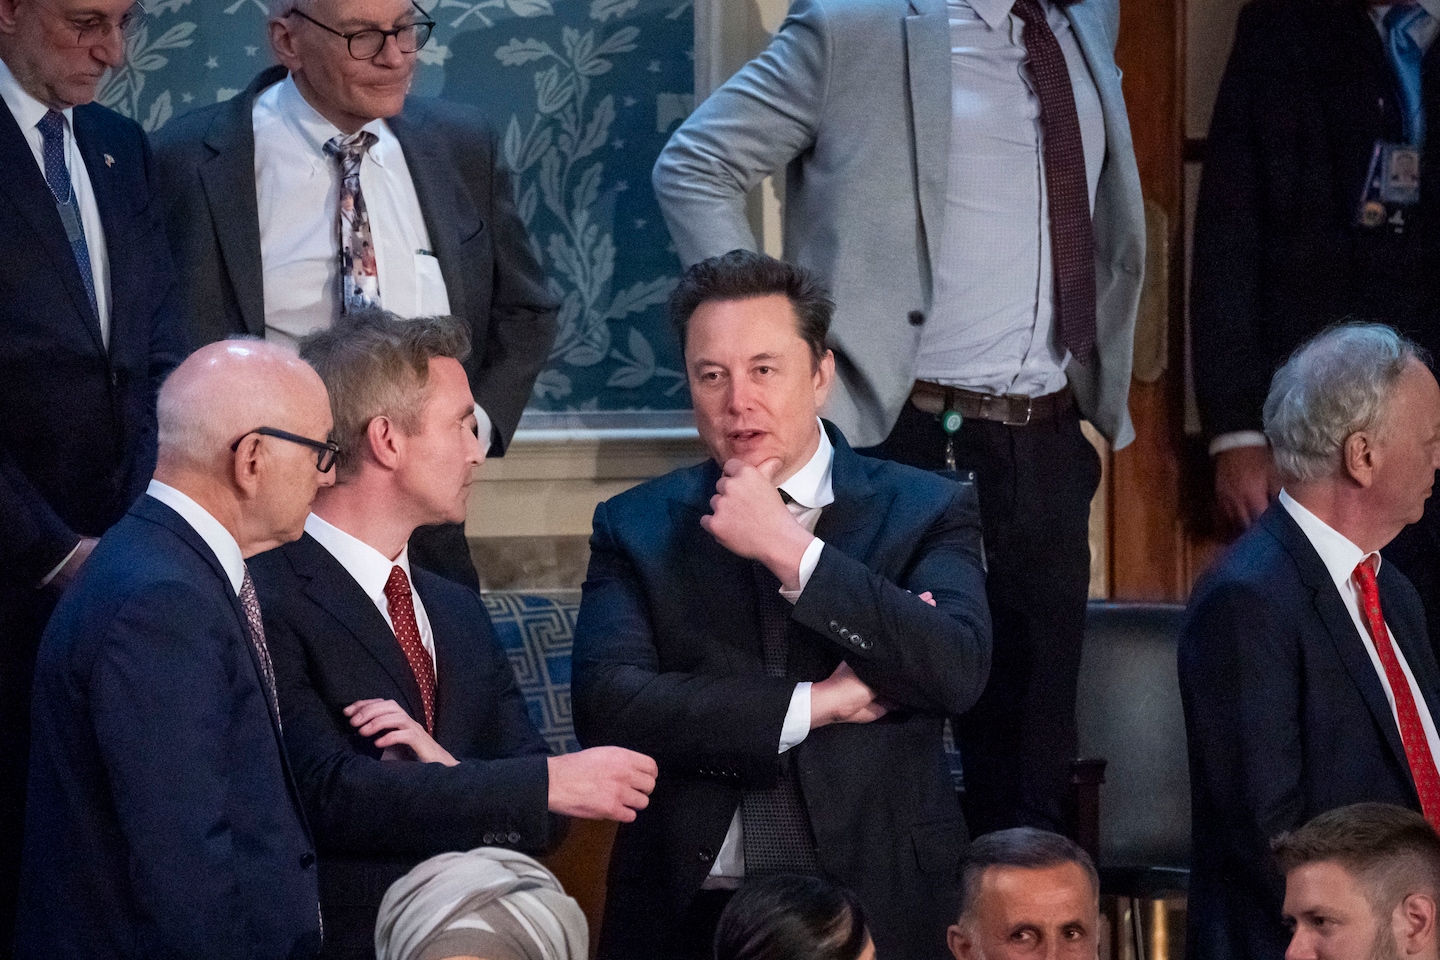 Elon Musk said his trans child was ‘dead.’ She’s calling him out.